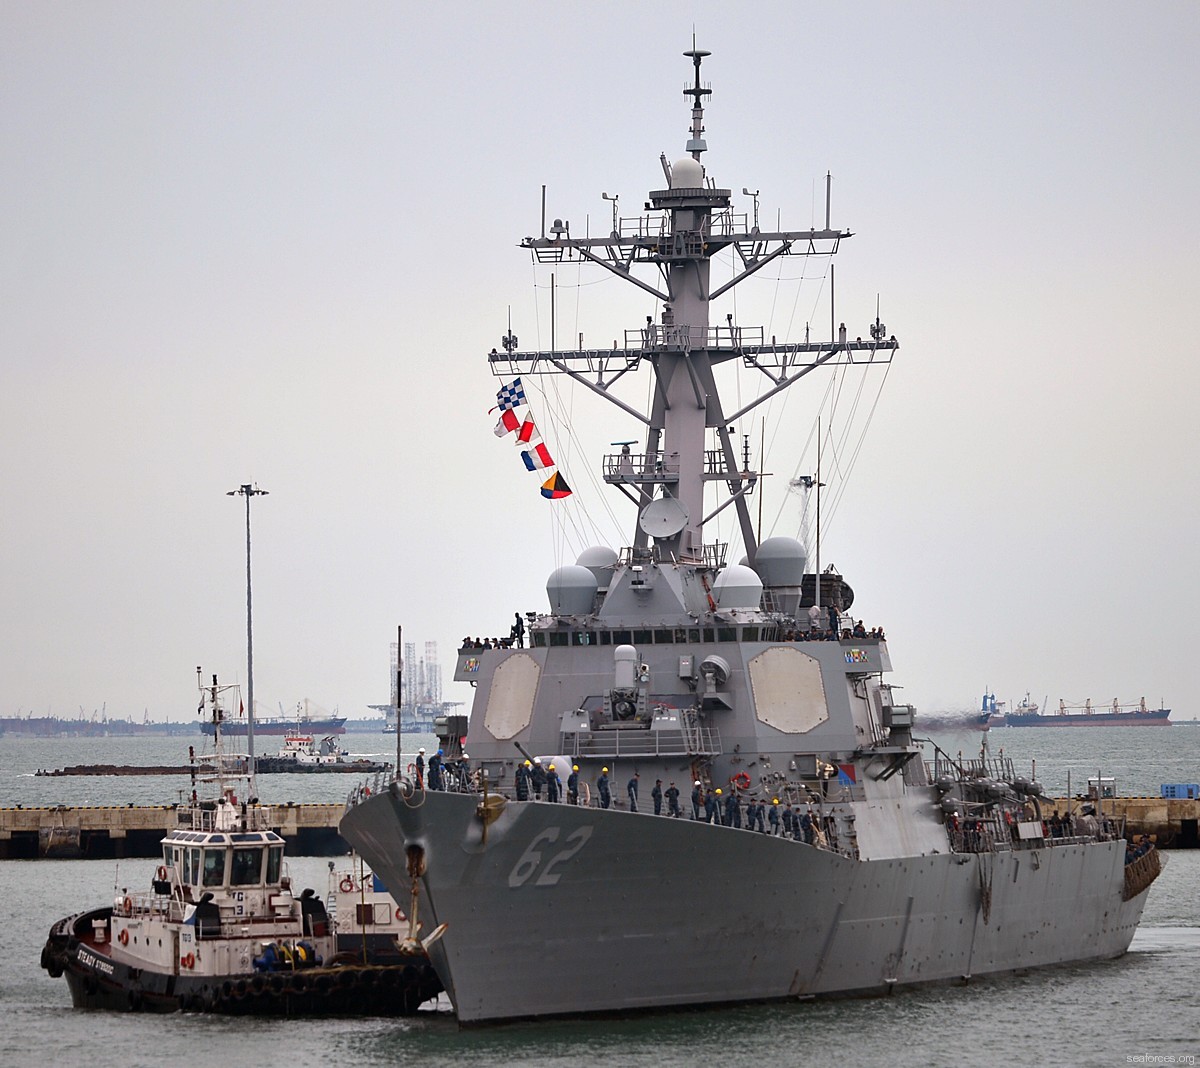 ddg-62 uss fitzgerald guided missile destroyer 2013 47 changi naval base singapore